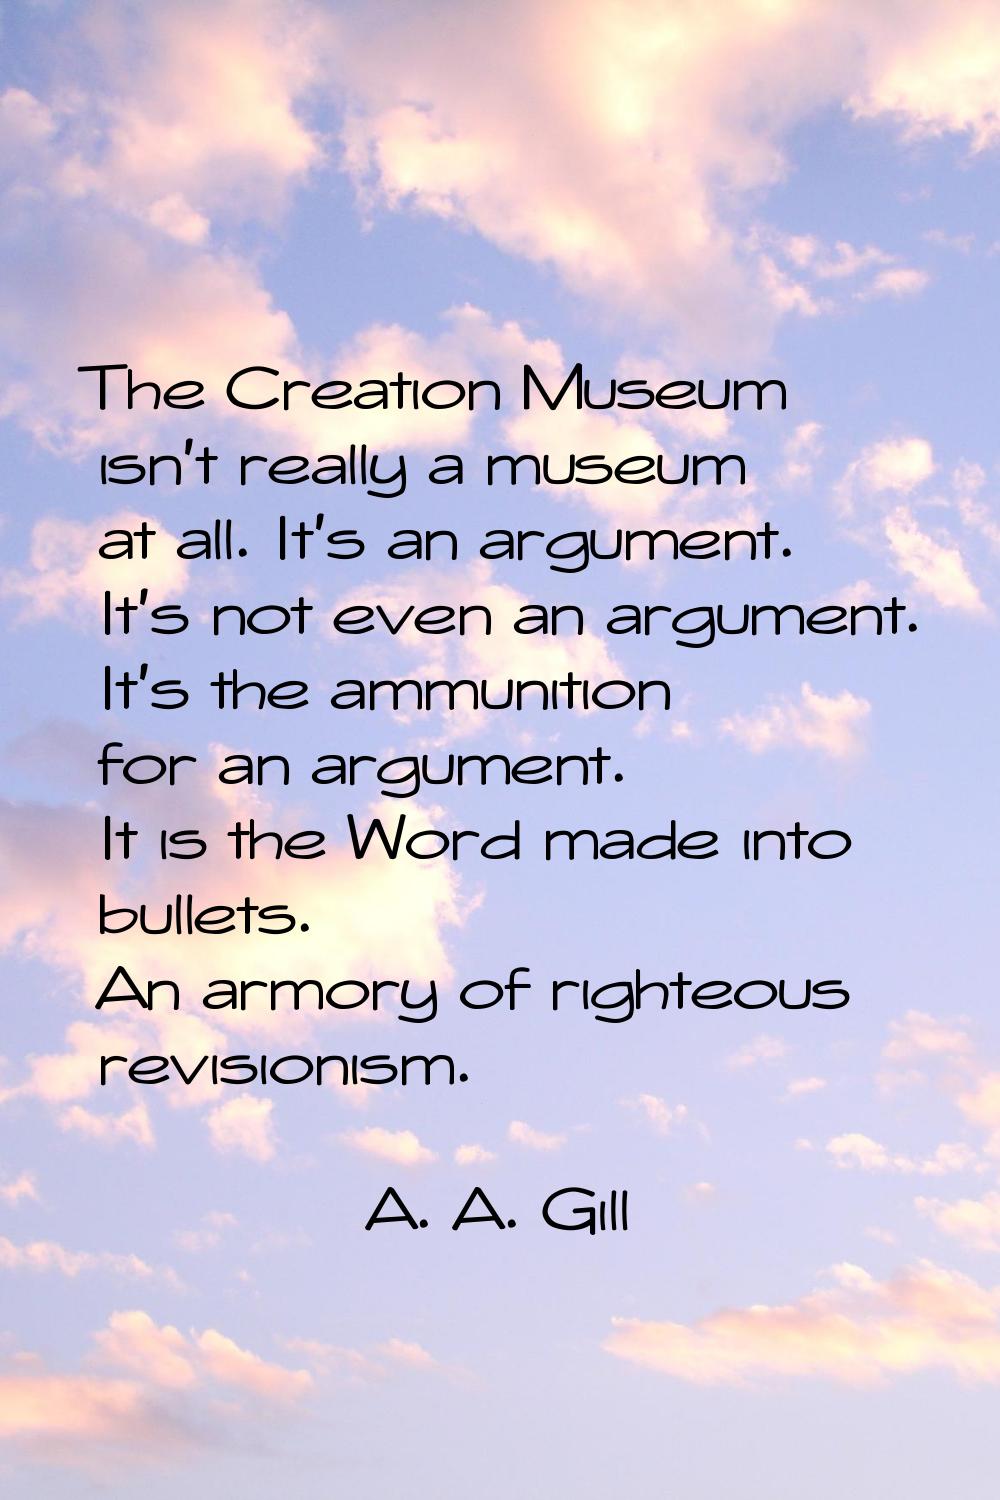 The Creation Museum isn't really a museum at all. It's an argument. It's not even an argument. It's